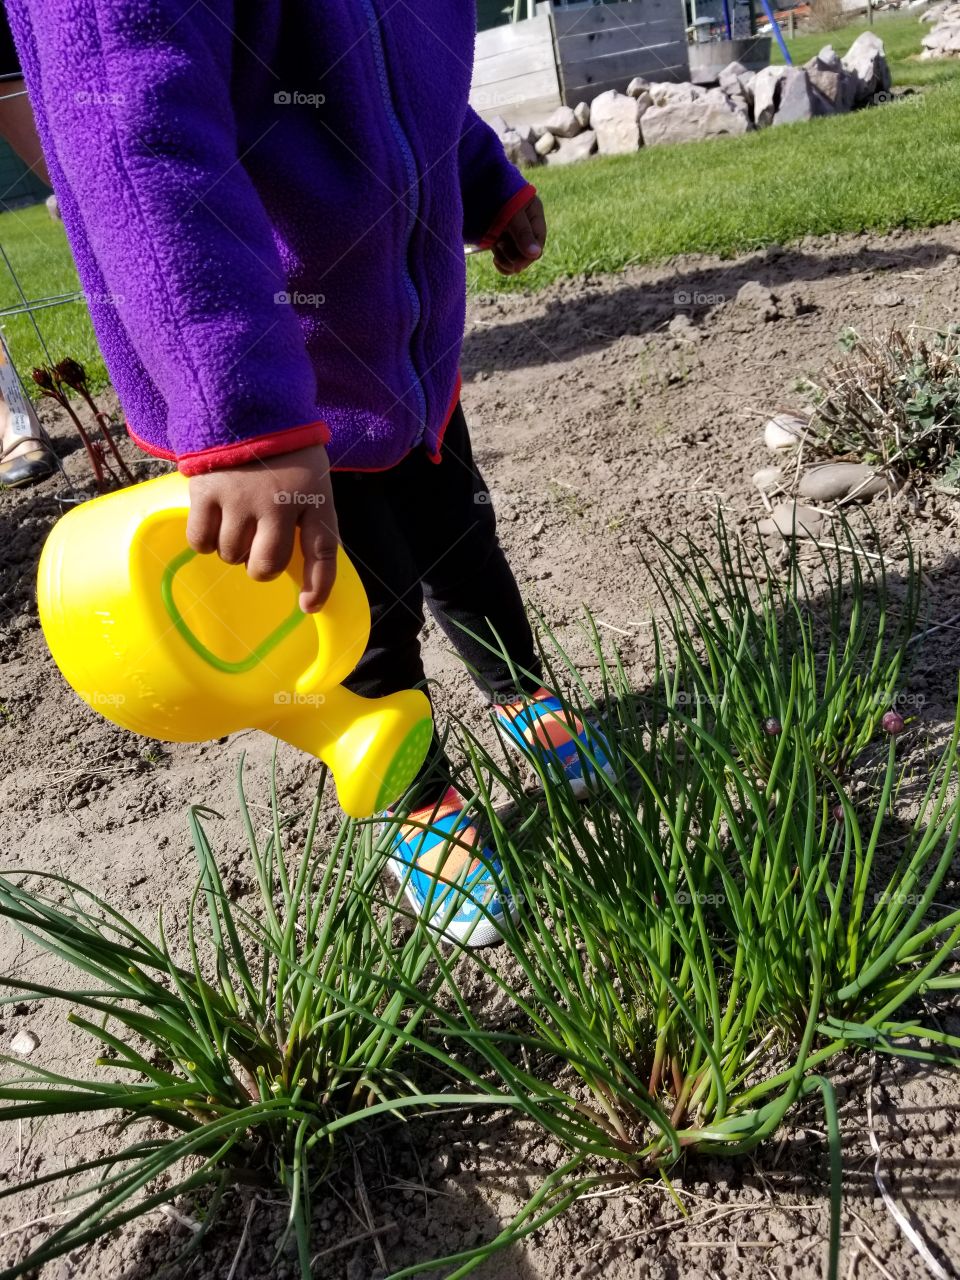 toddler learning how to use her watering can for the first time. she tells all the plants to grow,  come on grow.  we spend a lot of time outdoors and looking at plants! growing chives is child's play lol